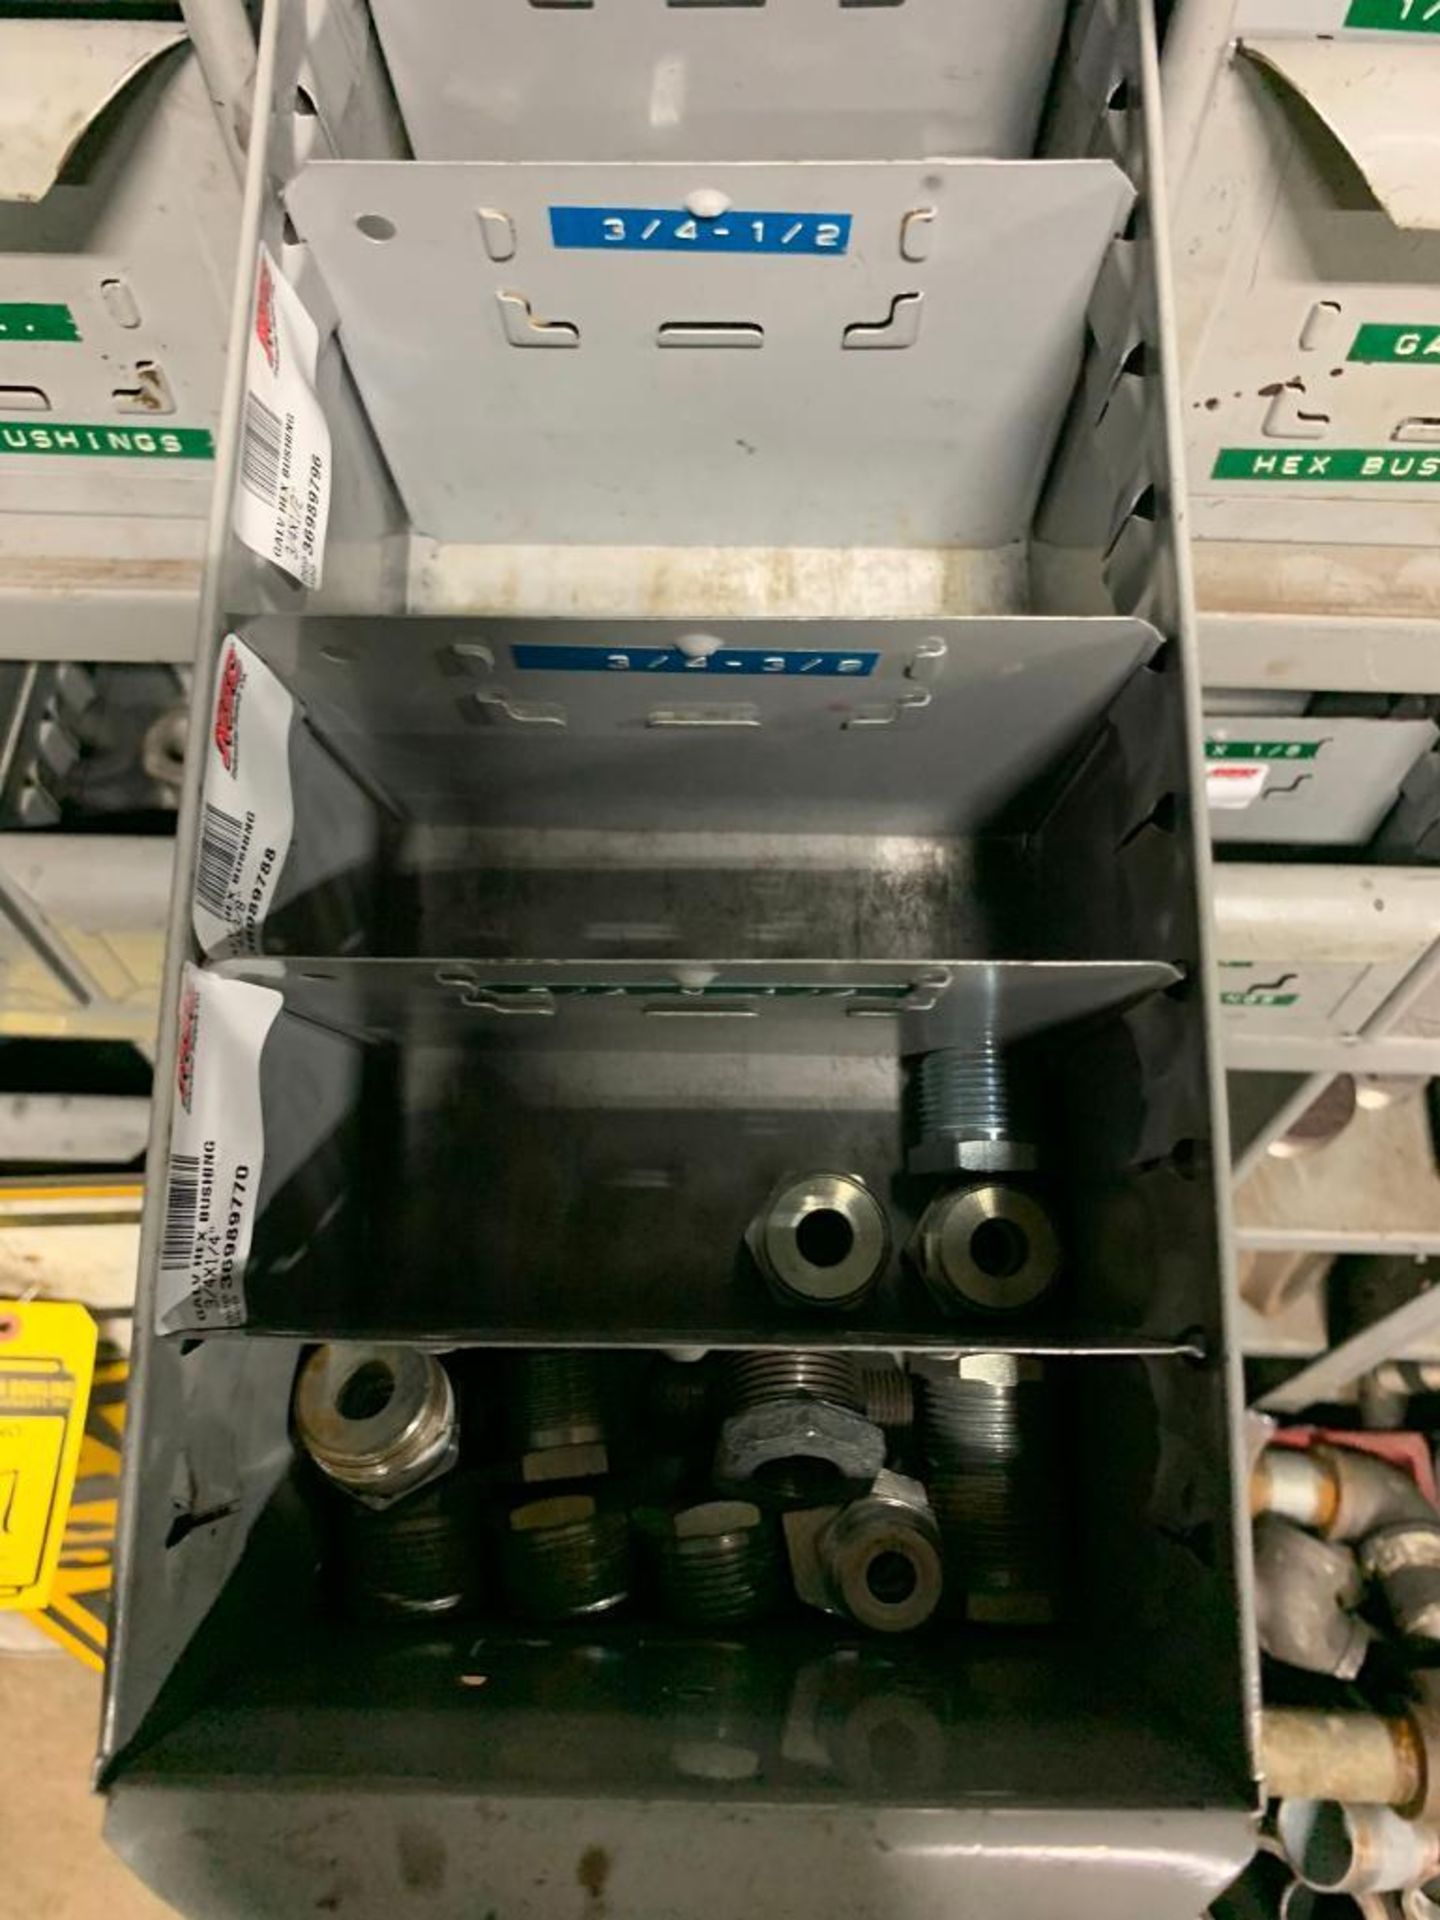 (10x) Bays of Assorted Shelving w/ Pipe Fittings, Pipe Nipples, Elbows, Connectors, Tees, Hardware - Image 15 of 21